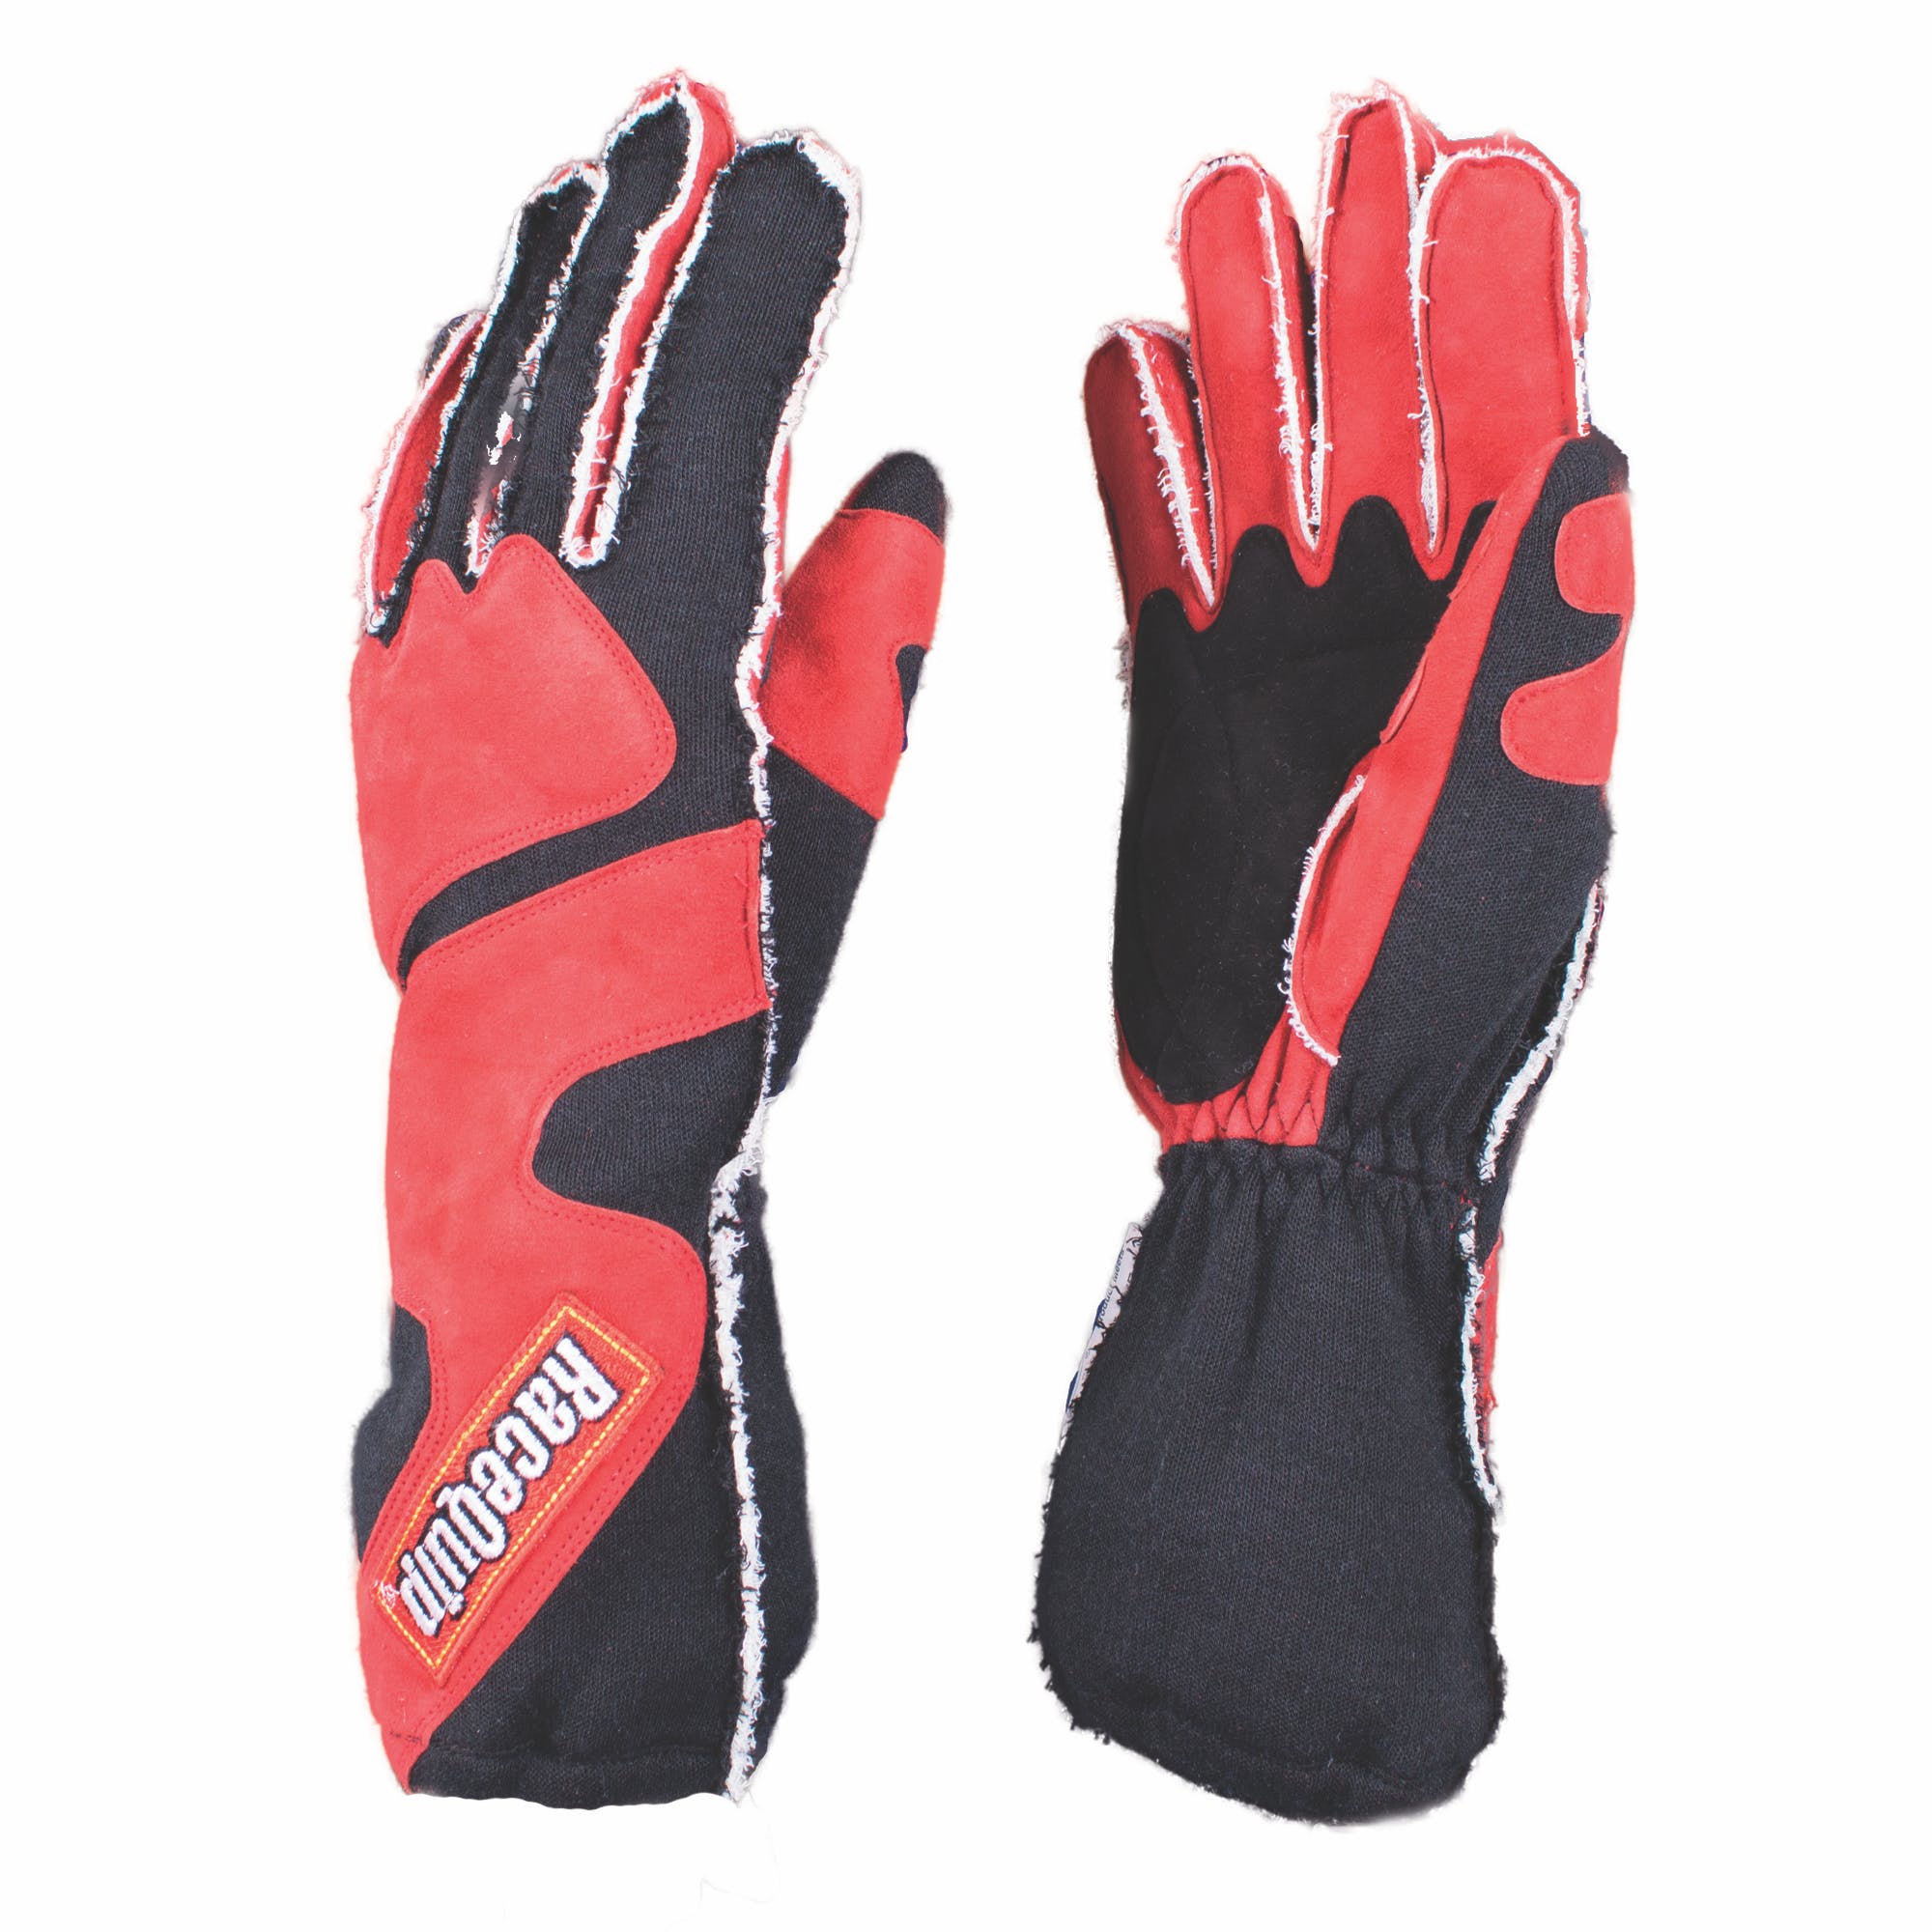 RaceQuip 356106 SFI-5 Angle-Cut Cuffed Racing Gloves (Red/Black, X-Large)